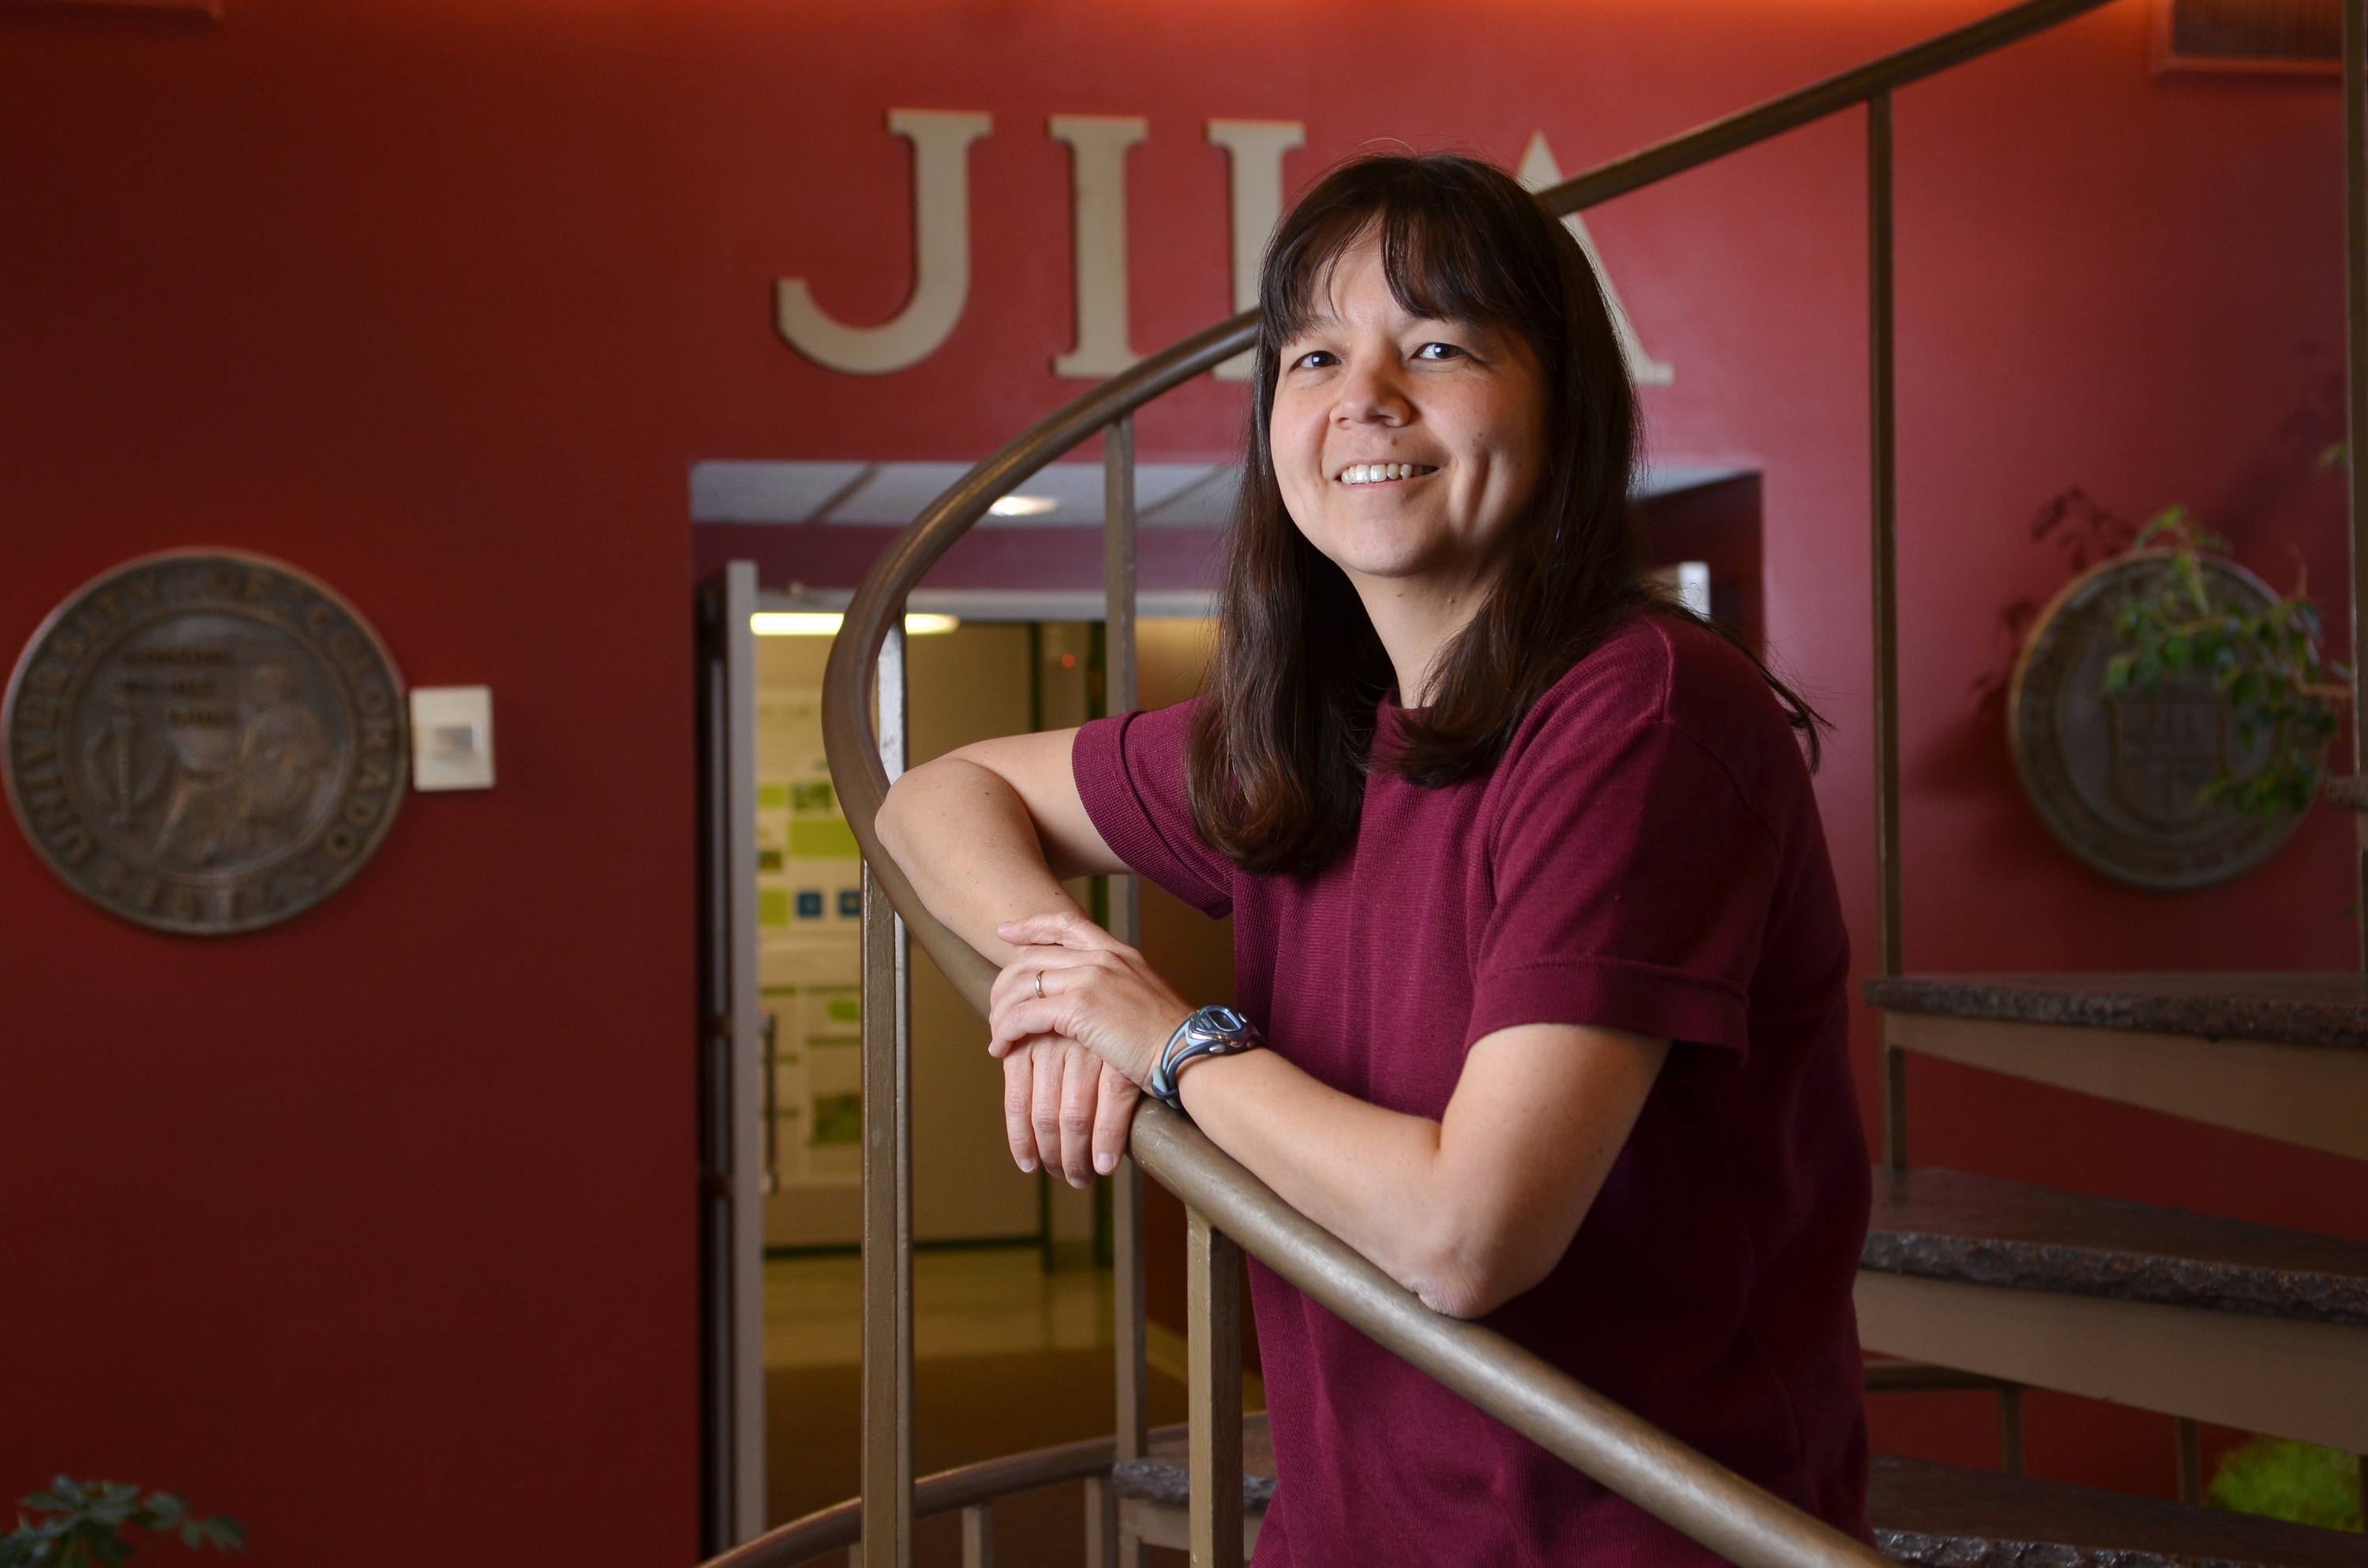 Deborah Jin in one of the lobbies of the JILA facility on the CU-Boulder campus